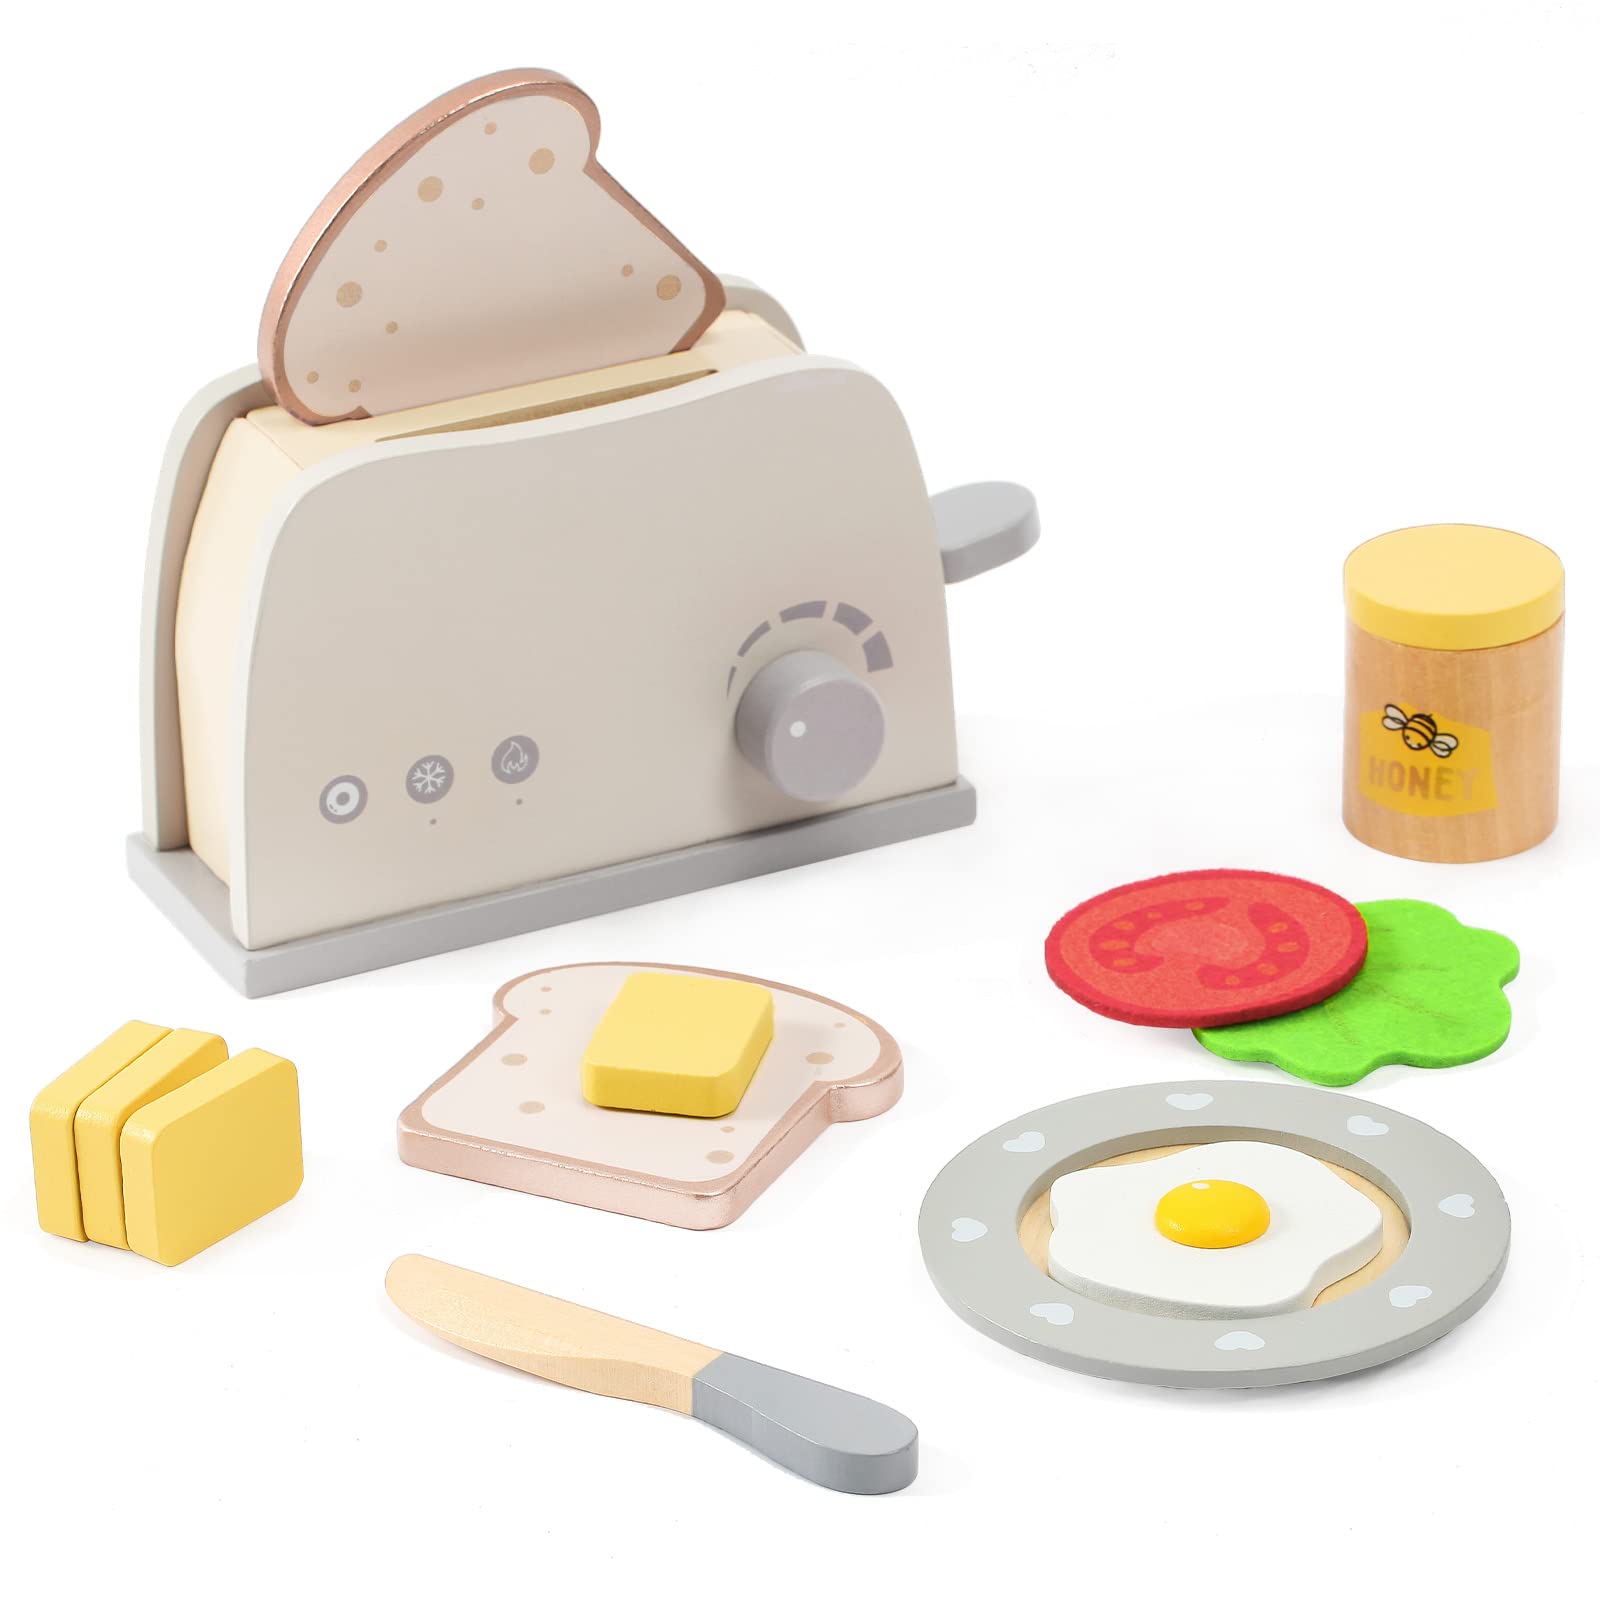 Labebe - Pop up Toaster Wood Play Kitchen Playset